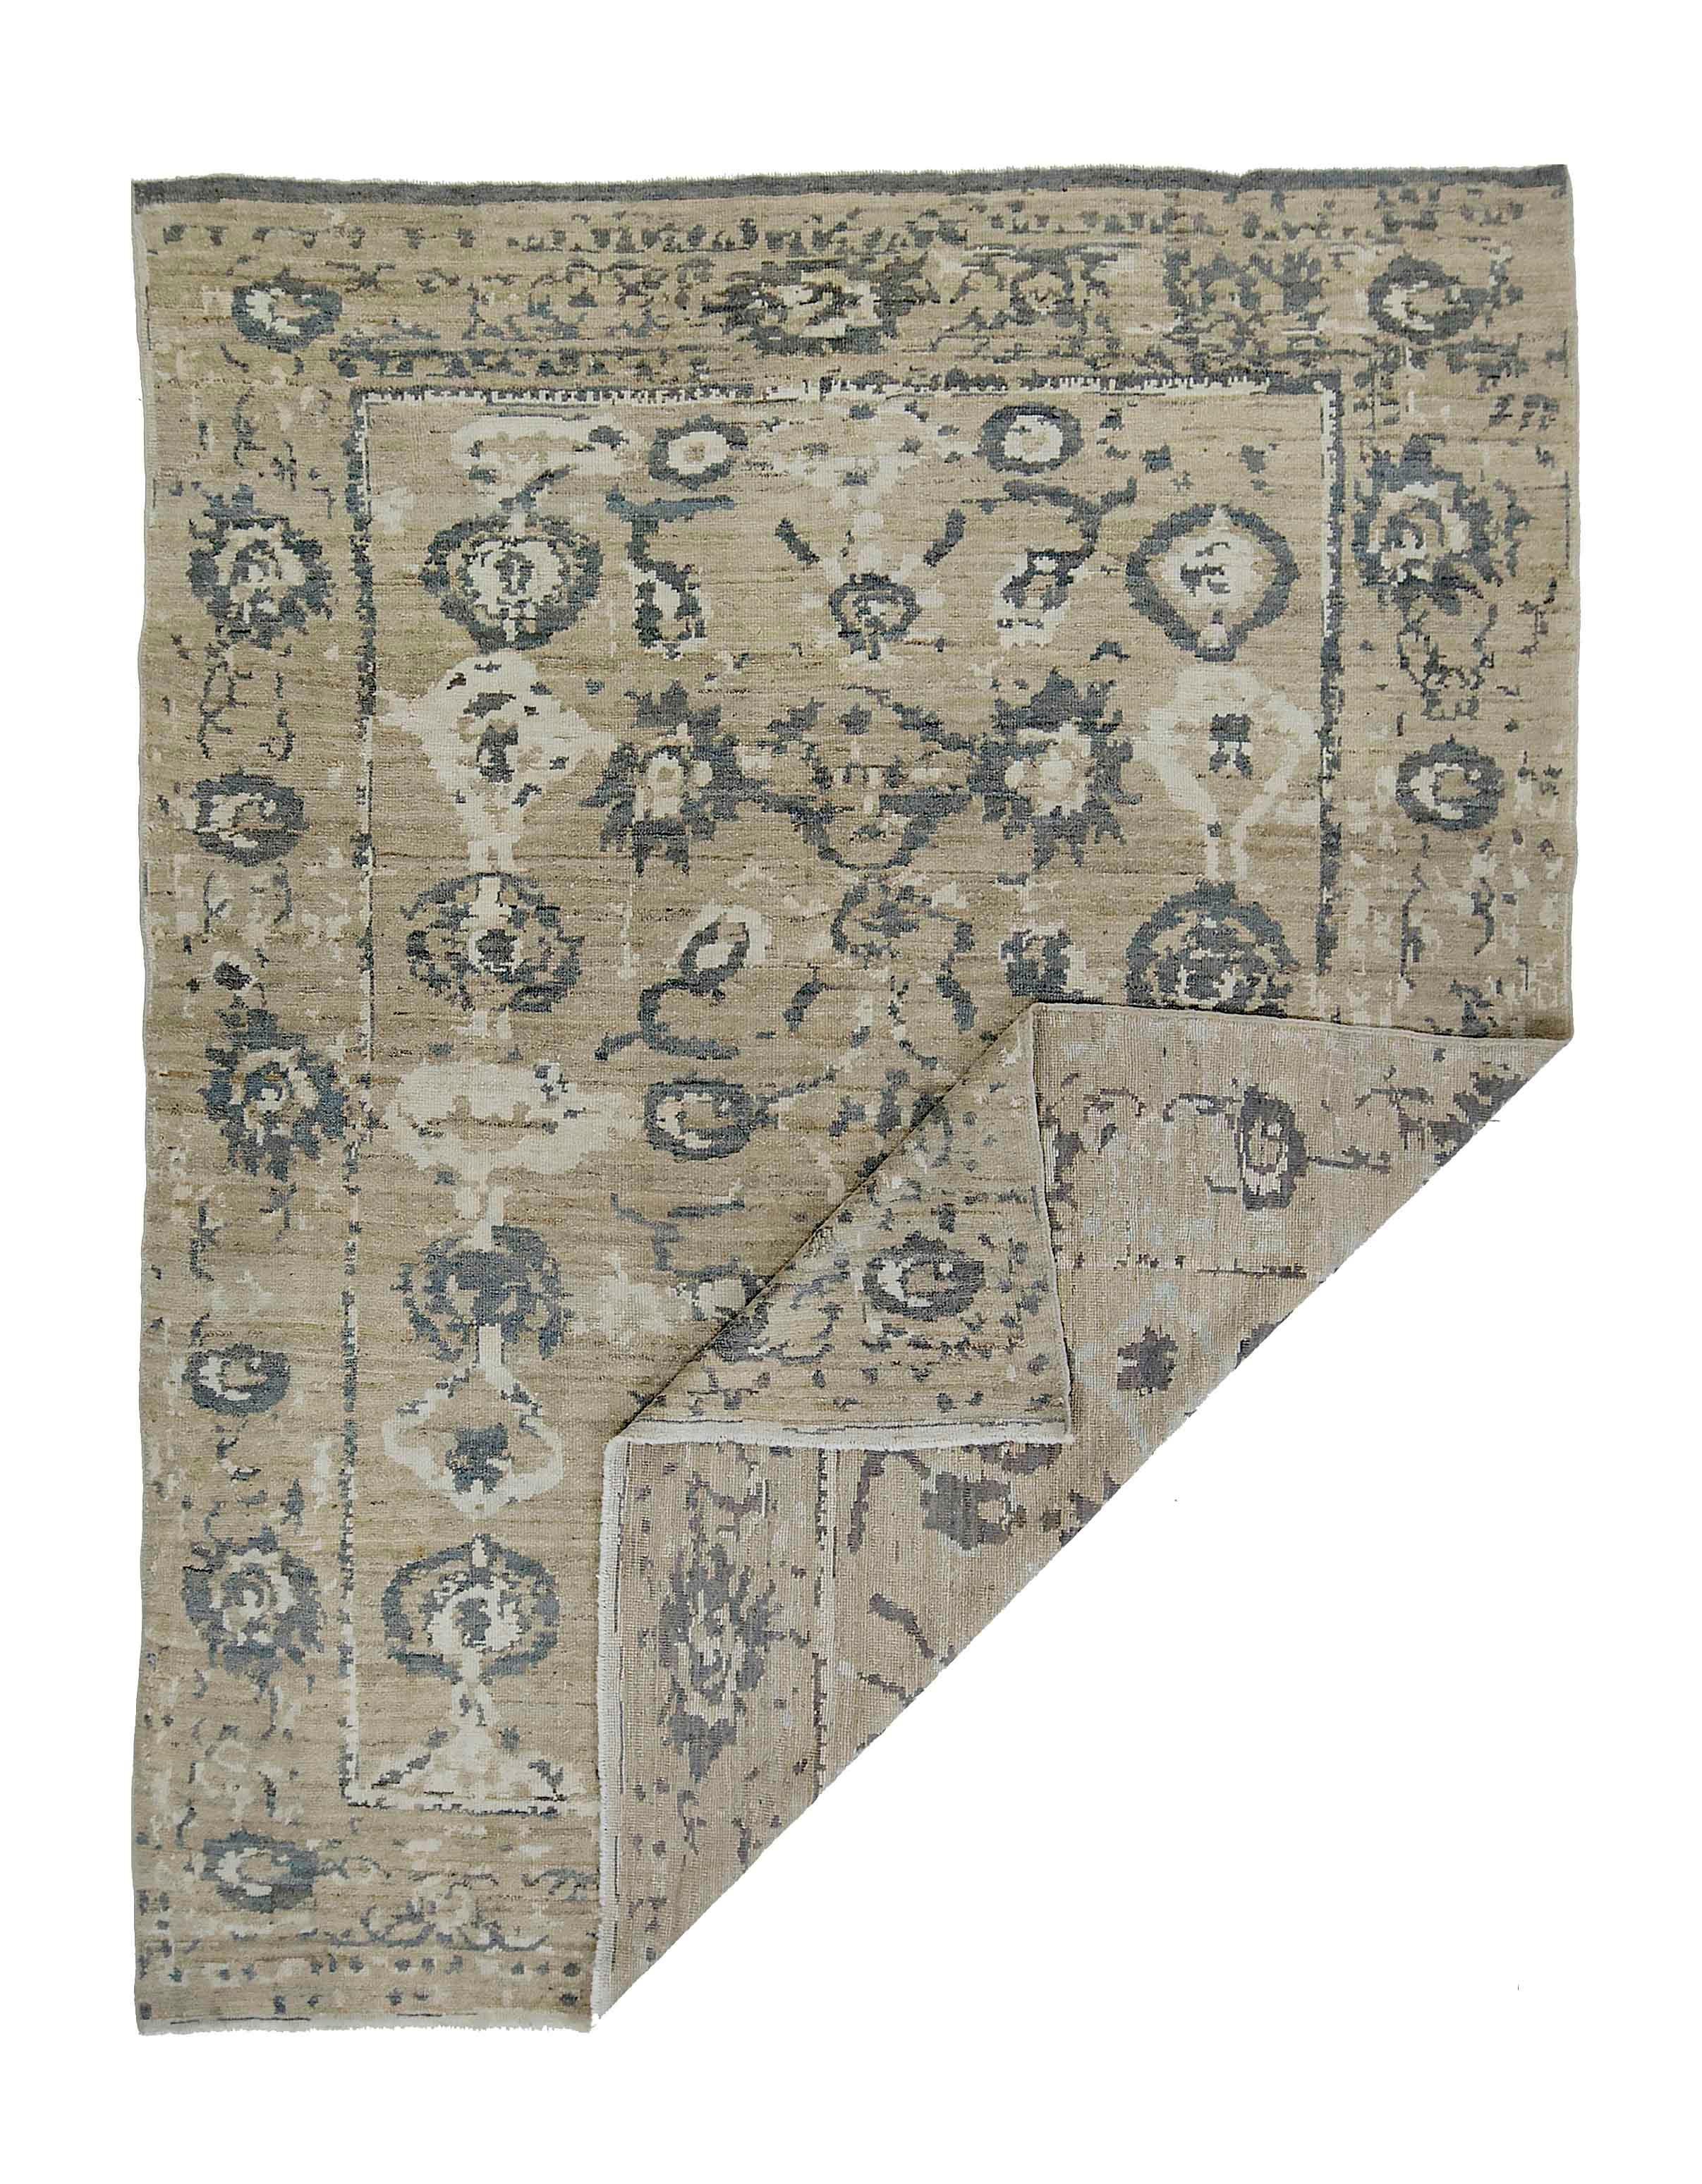 Contemporary New Turkish Oushak Rug with Gray and White Floral Patterns on Beige Field For Sale